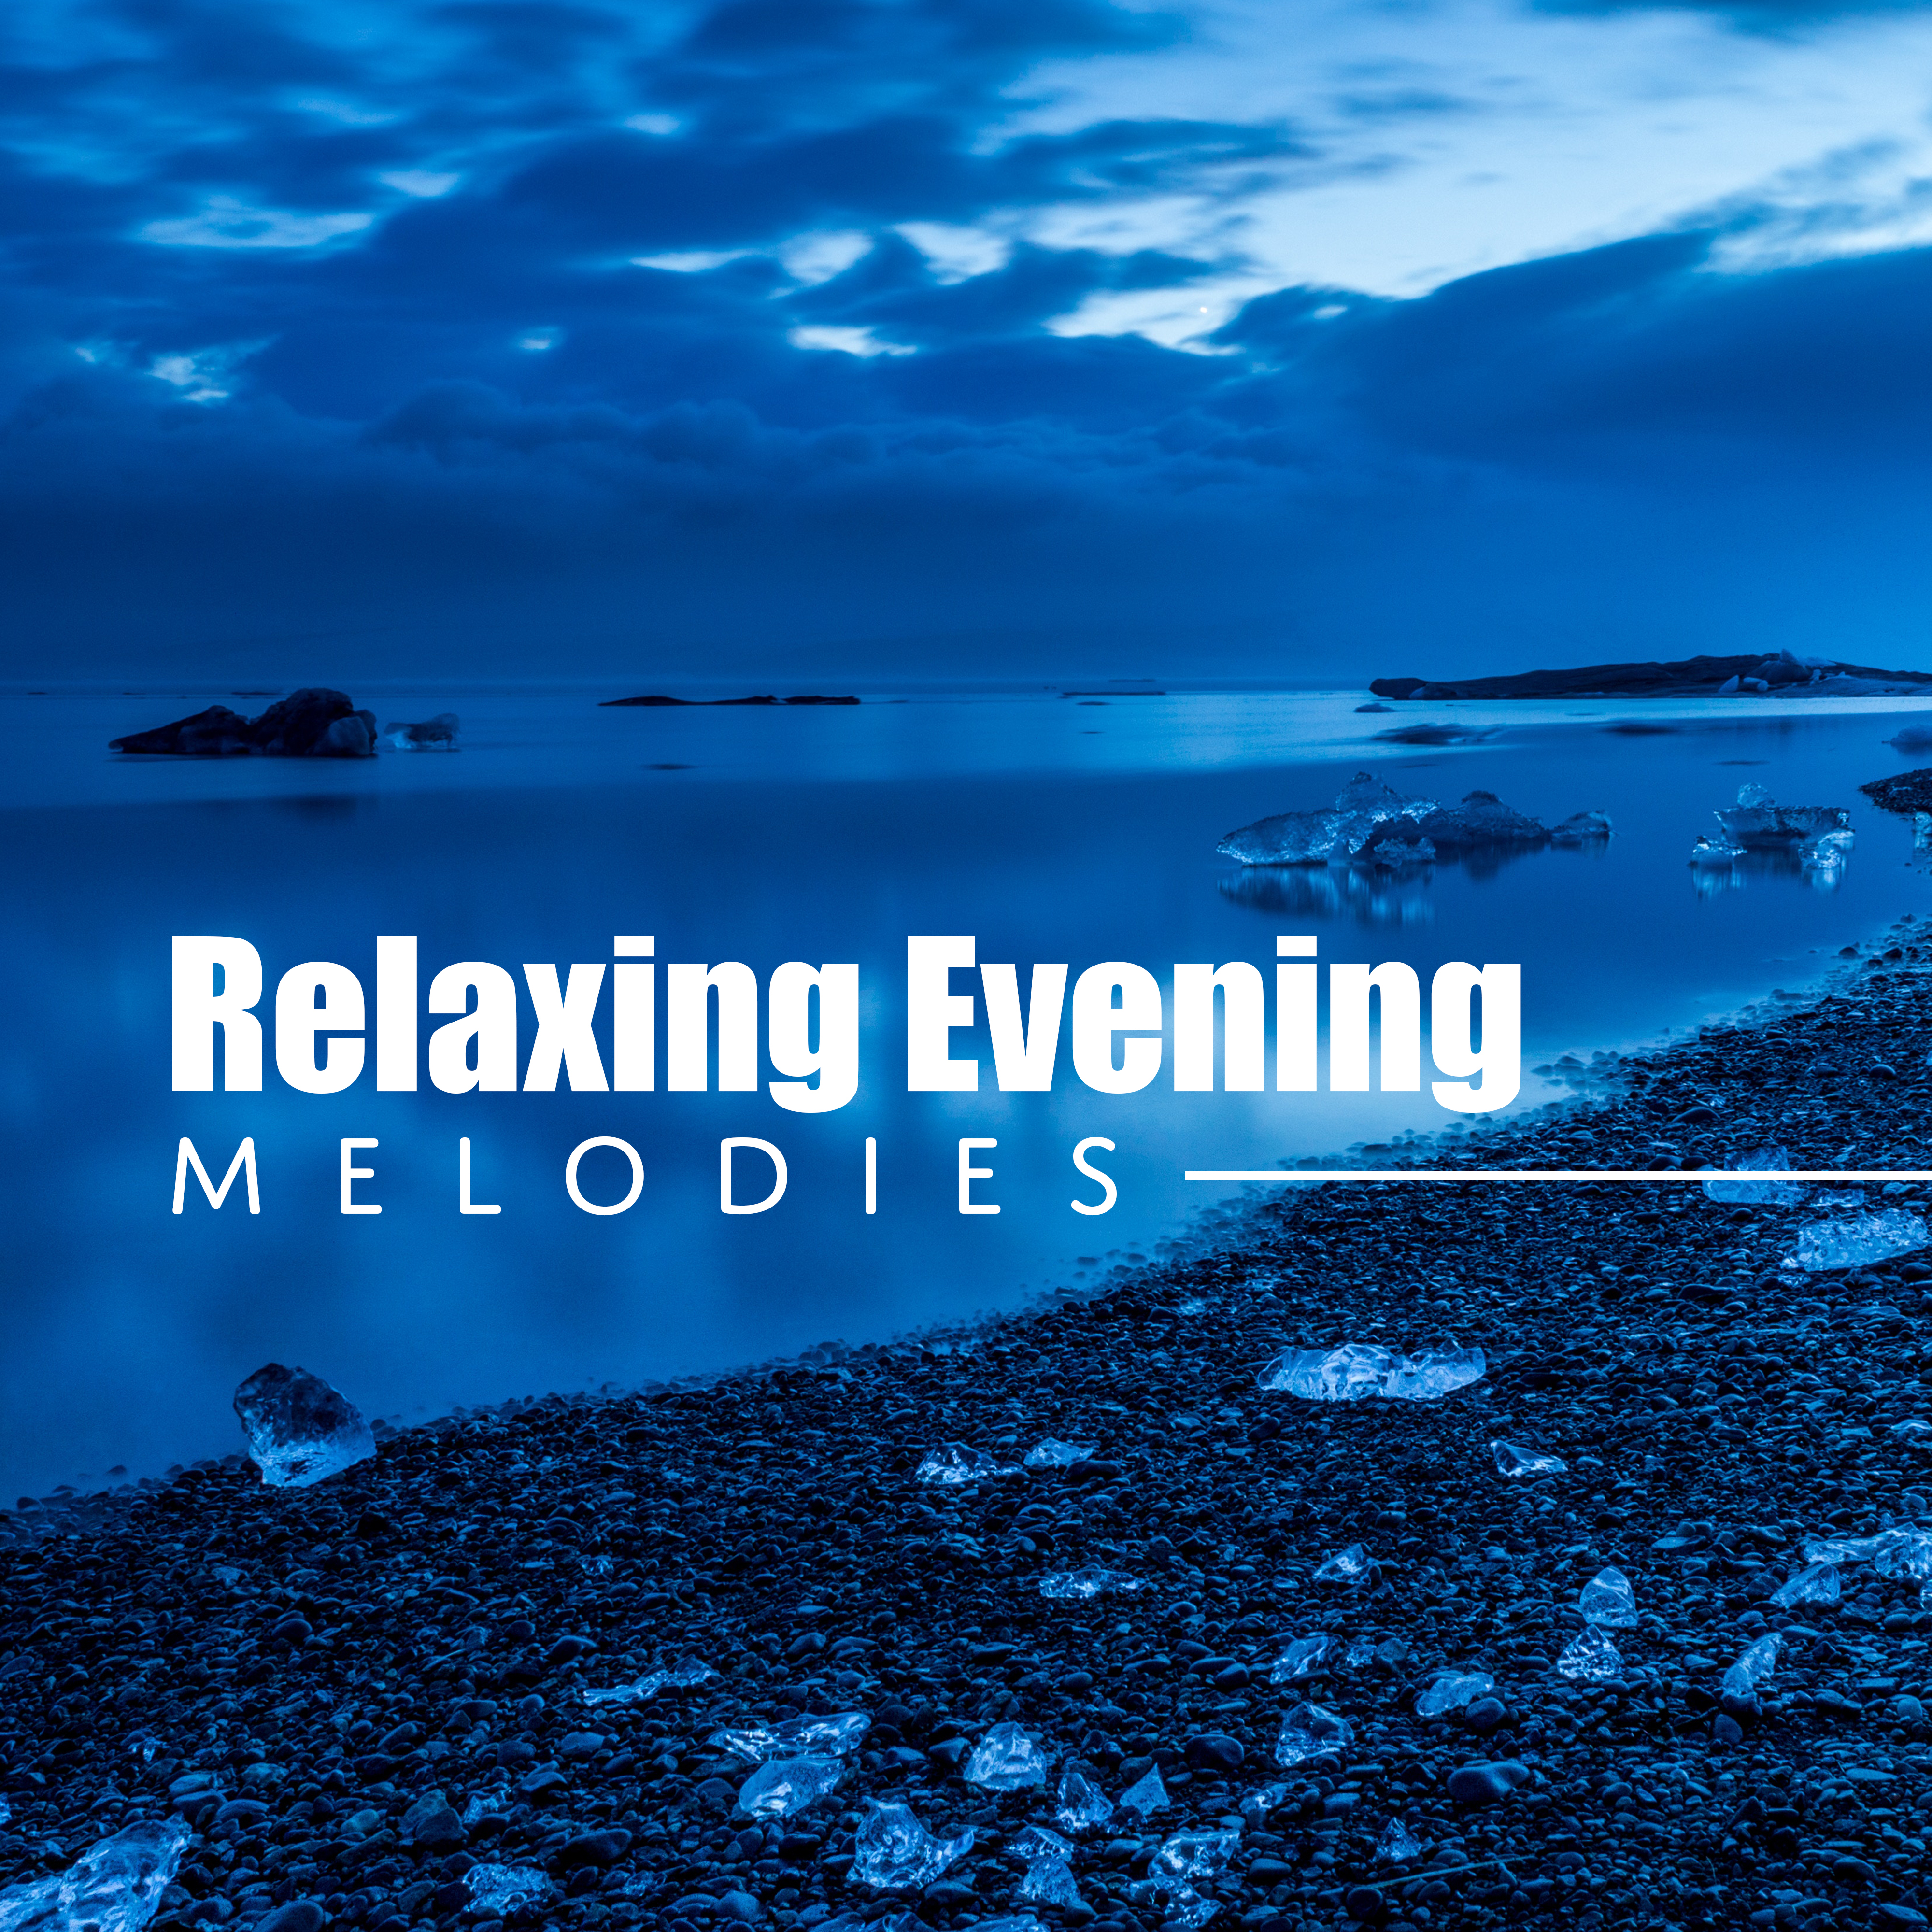 Relaxing Evening Melodies